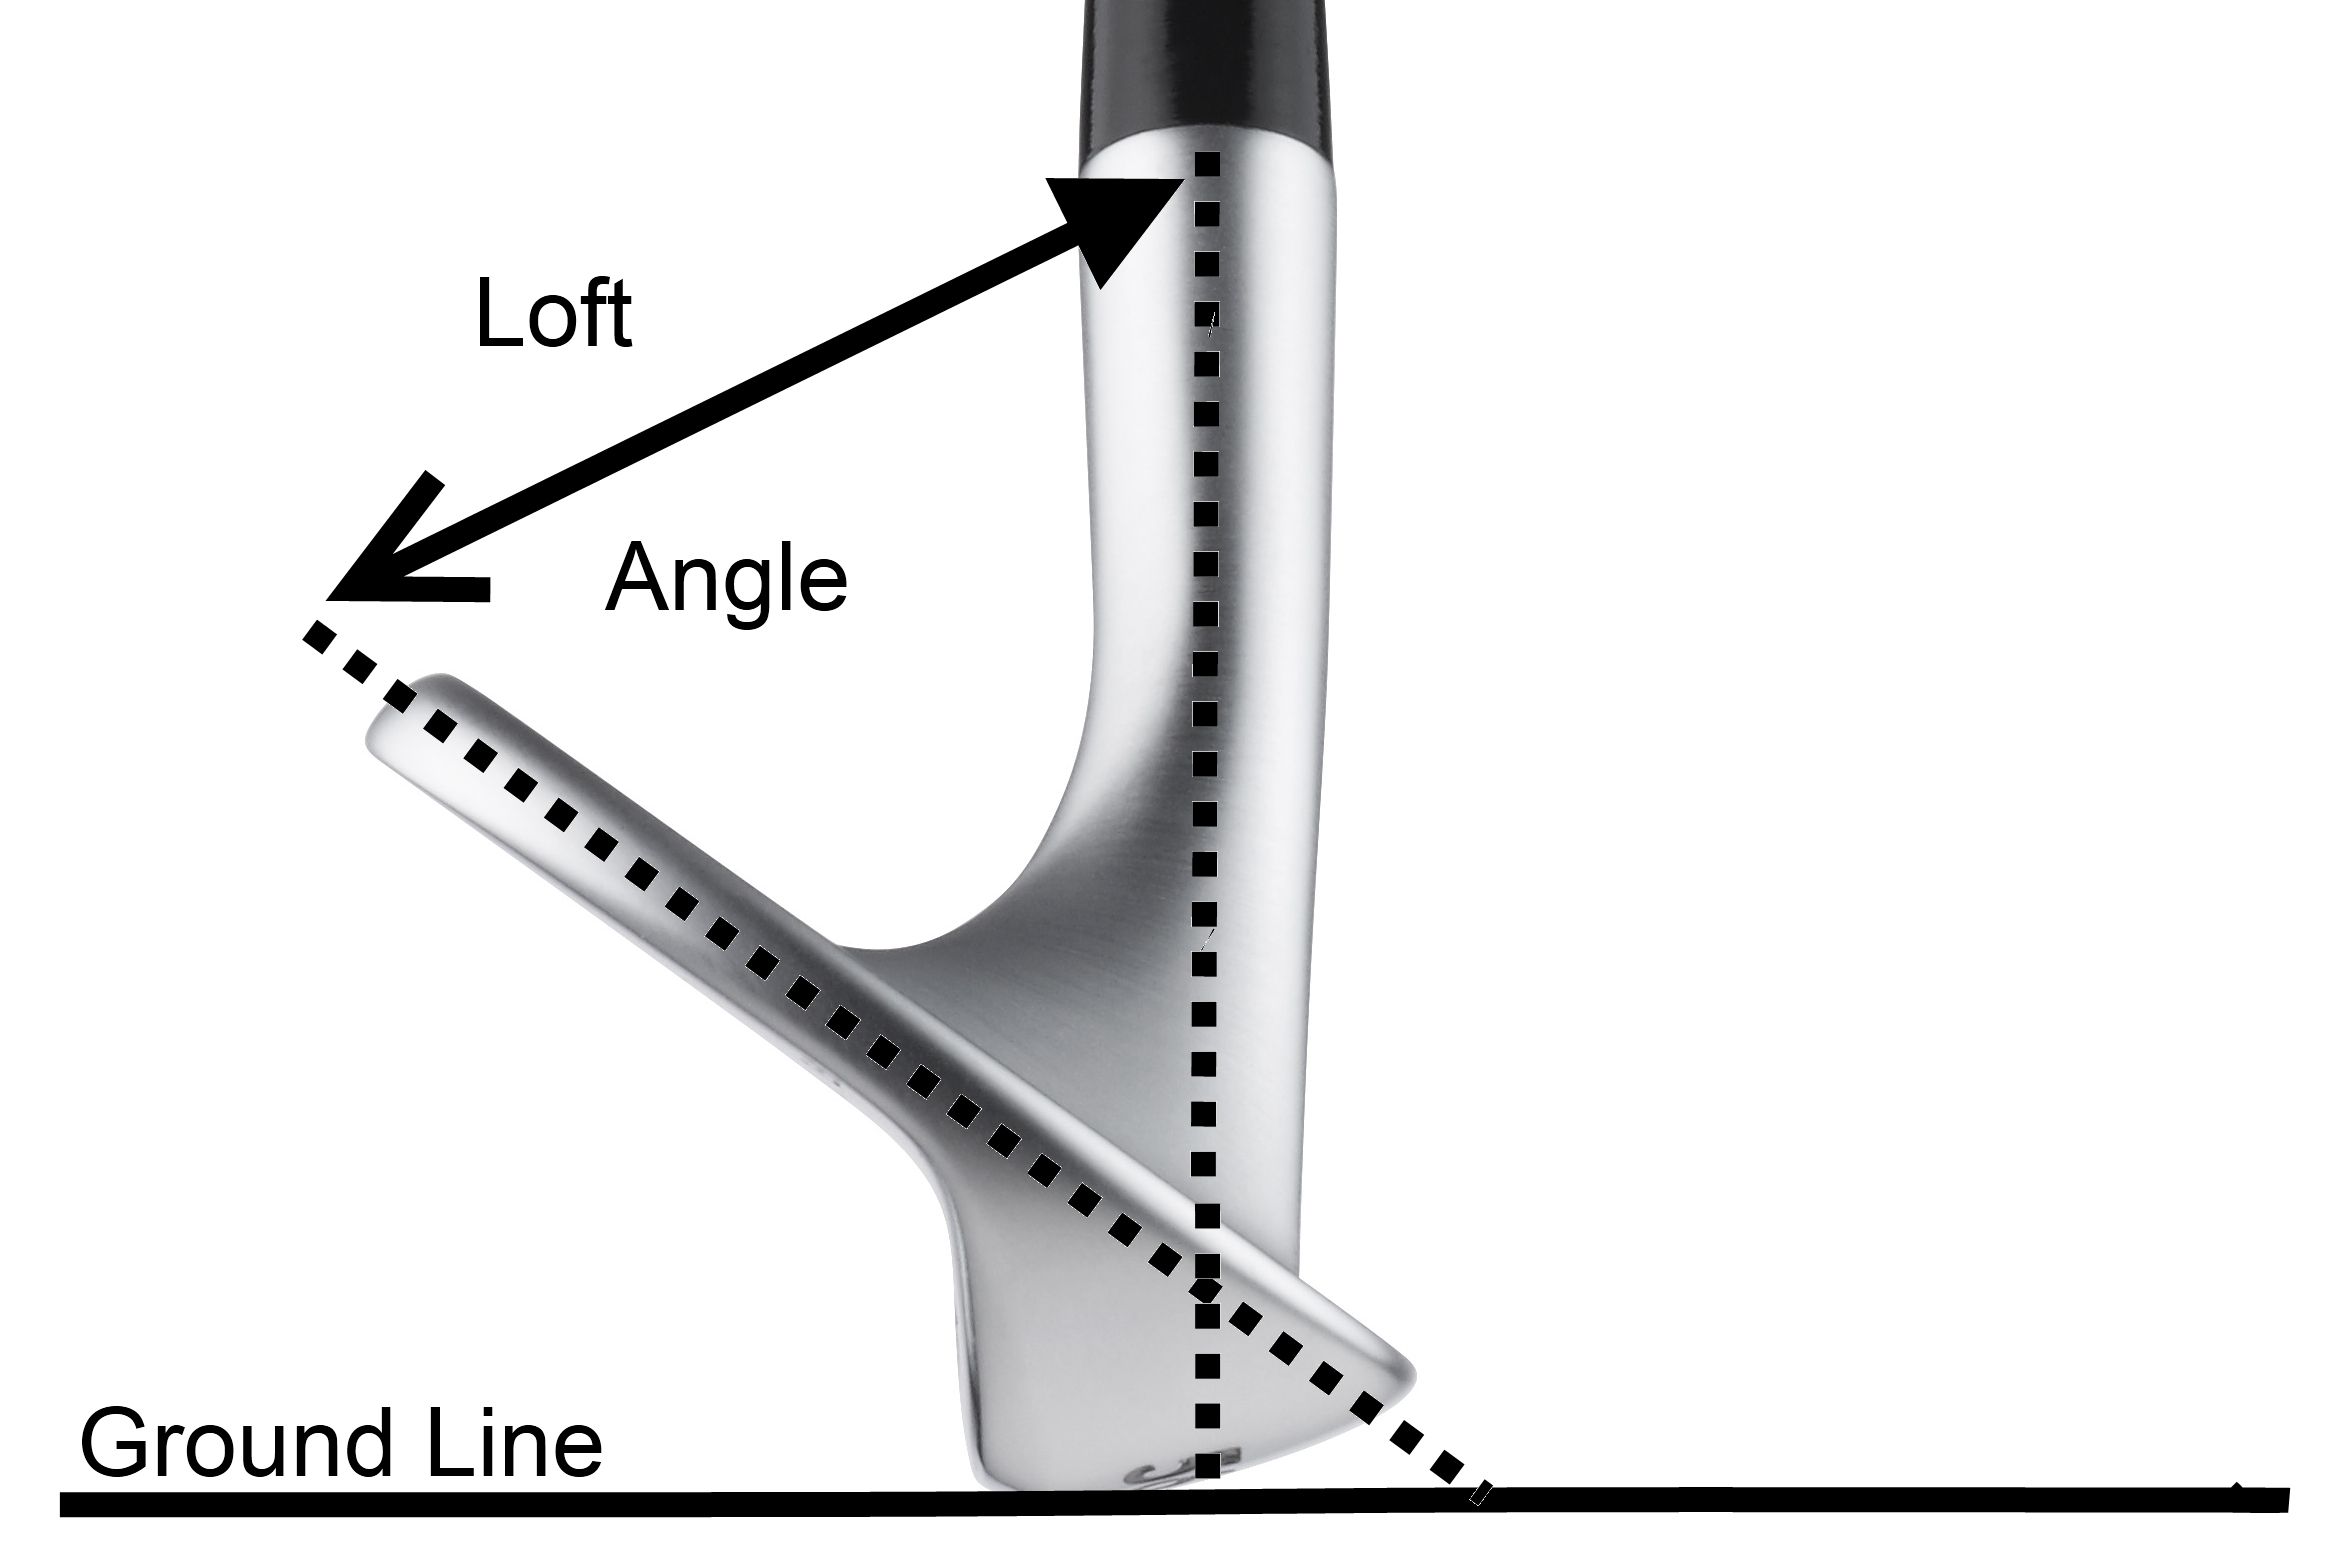 clubs of meaning 6 Golf Angle Loft Meaning The of Explaining Clubs in